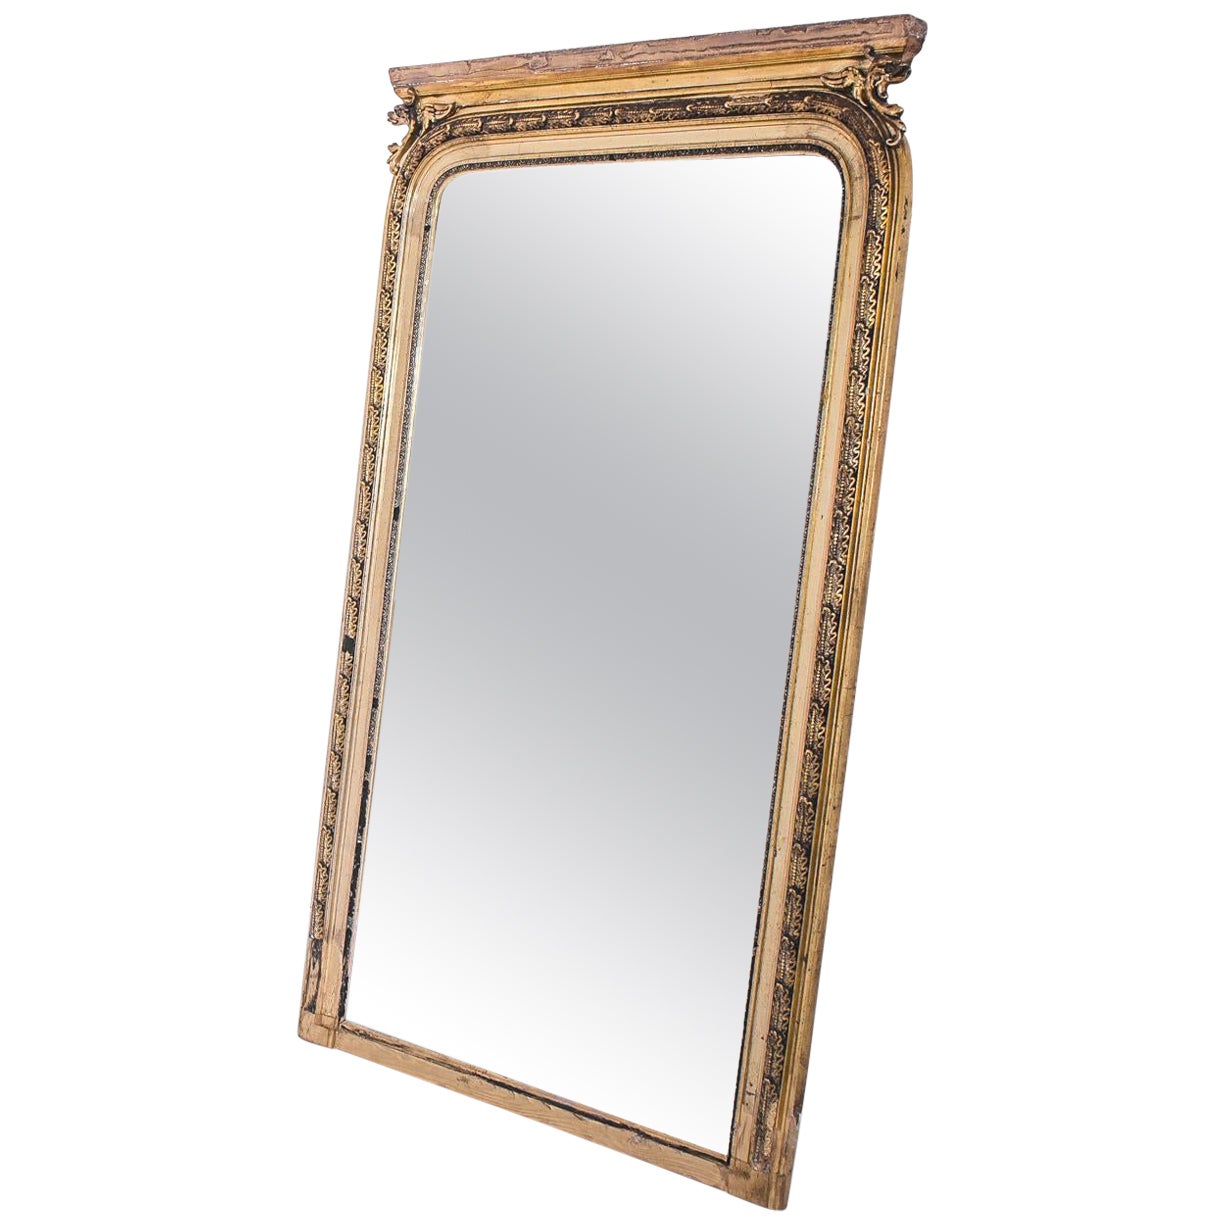 1880s French Gilded Wood Mirror